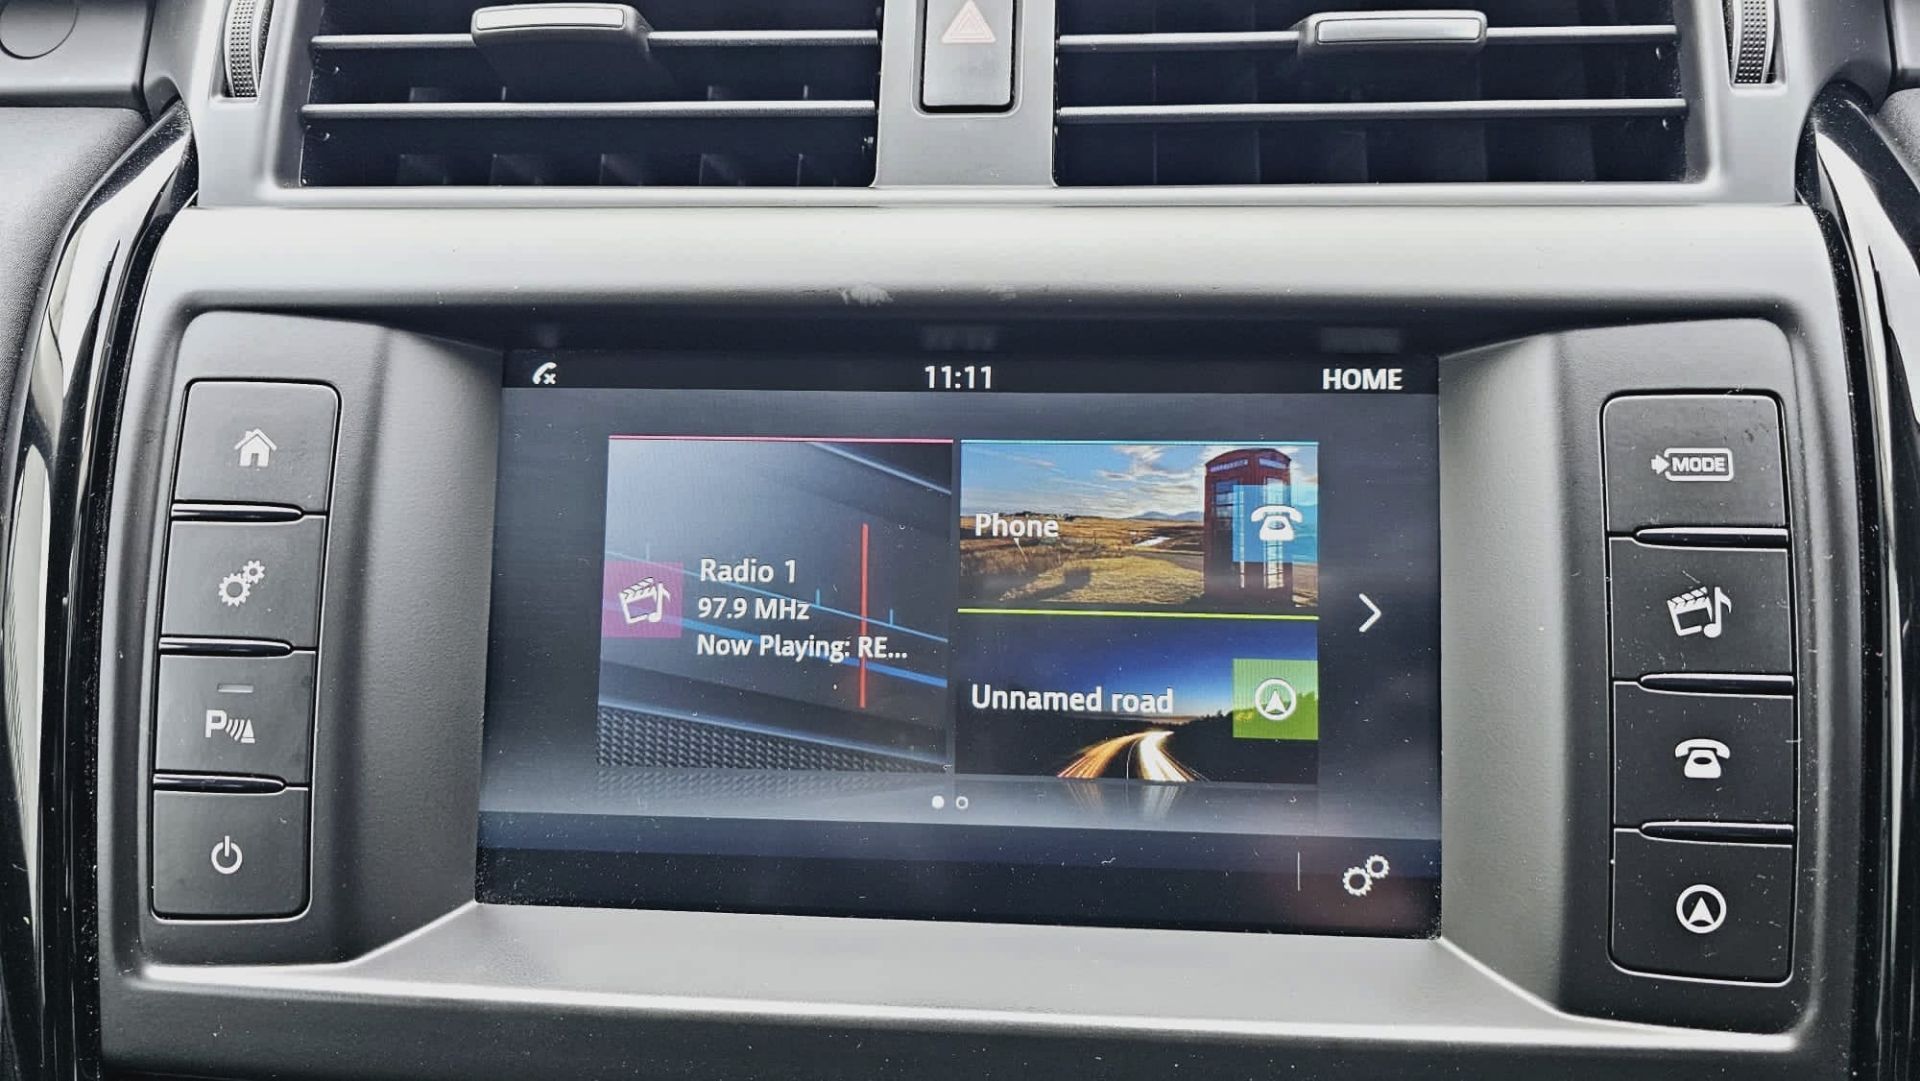 Land Rover Discovery 5 - (New Model) Diesel Auto - 2018 Model - Black Pack Edition - Sat Nav - Look - Image 35 of 45